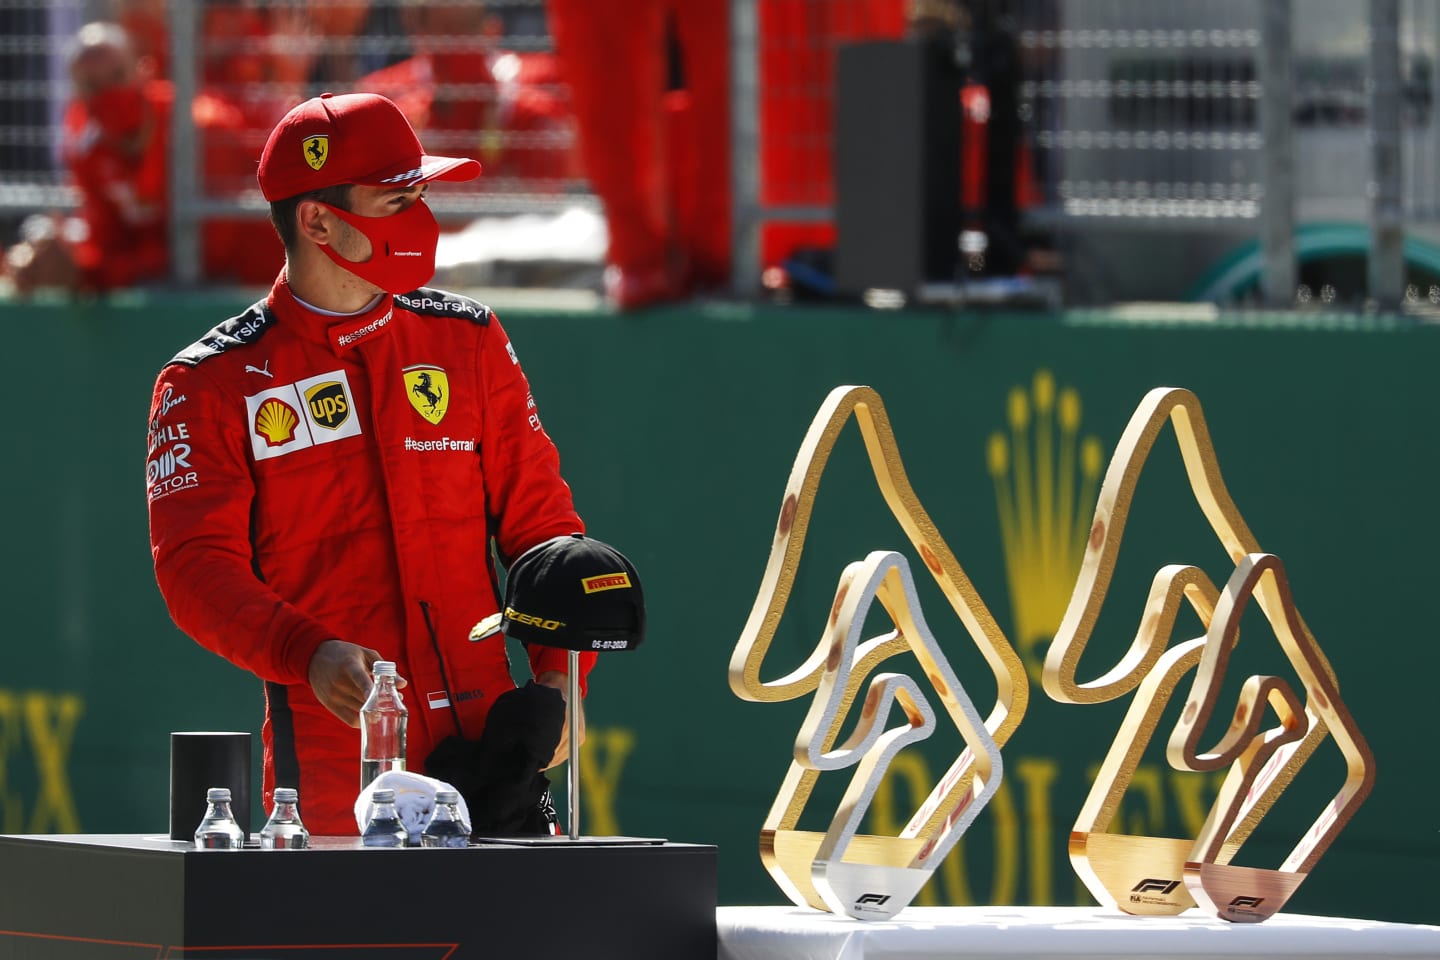 SPIELBERG, AUSTRIA - JULY 05: Second place Charles Leclerc of Monaco and Ferrari looks on before